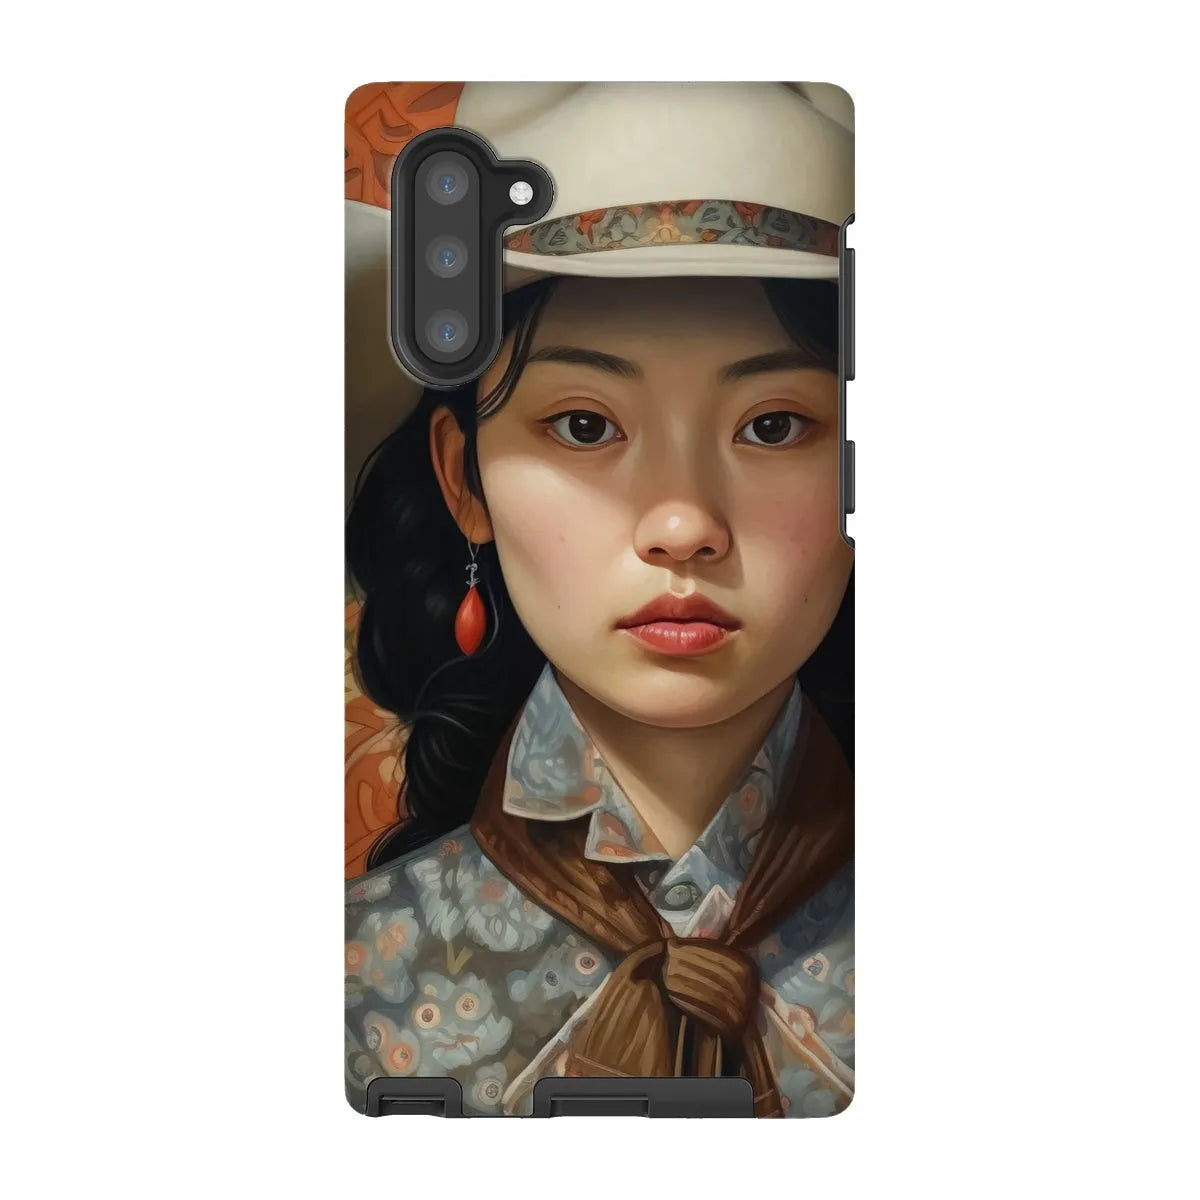 Zhi The Lesbian Cowgirl - Sapphic Art Phone Case - Samsung Galaxy Note 10 / Matte - Mobile Phone Cases - Aesthetic Art